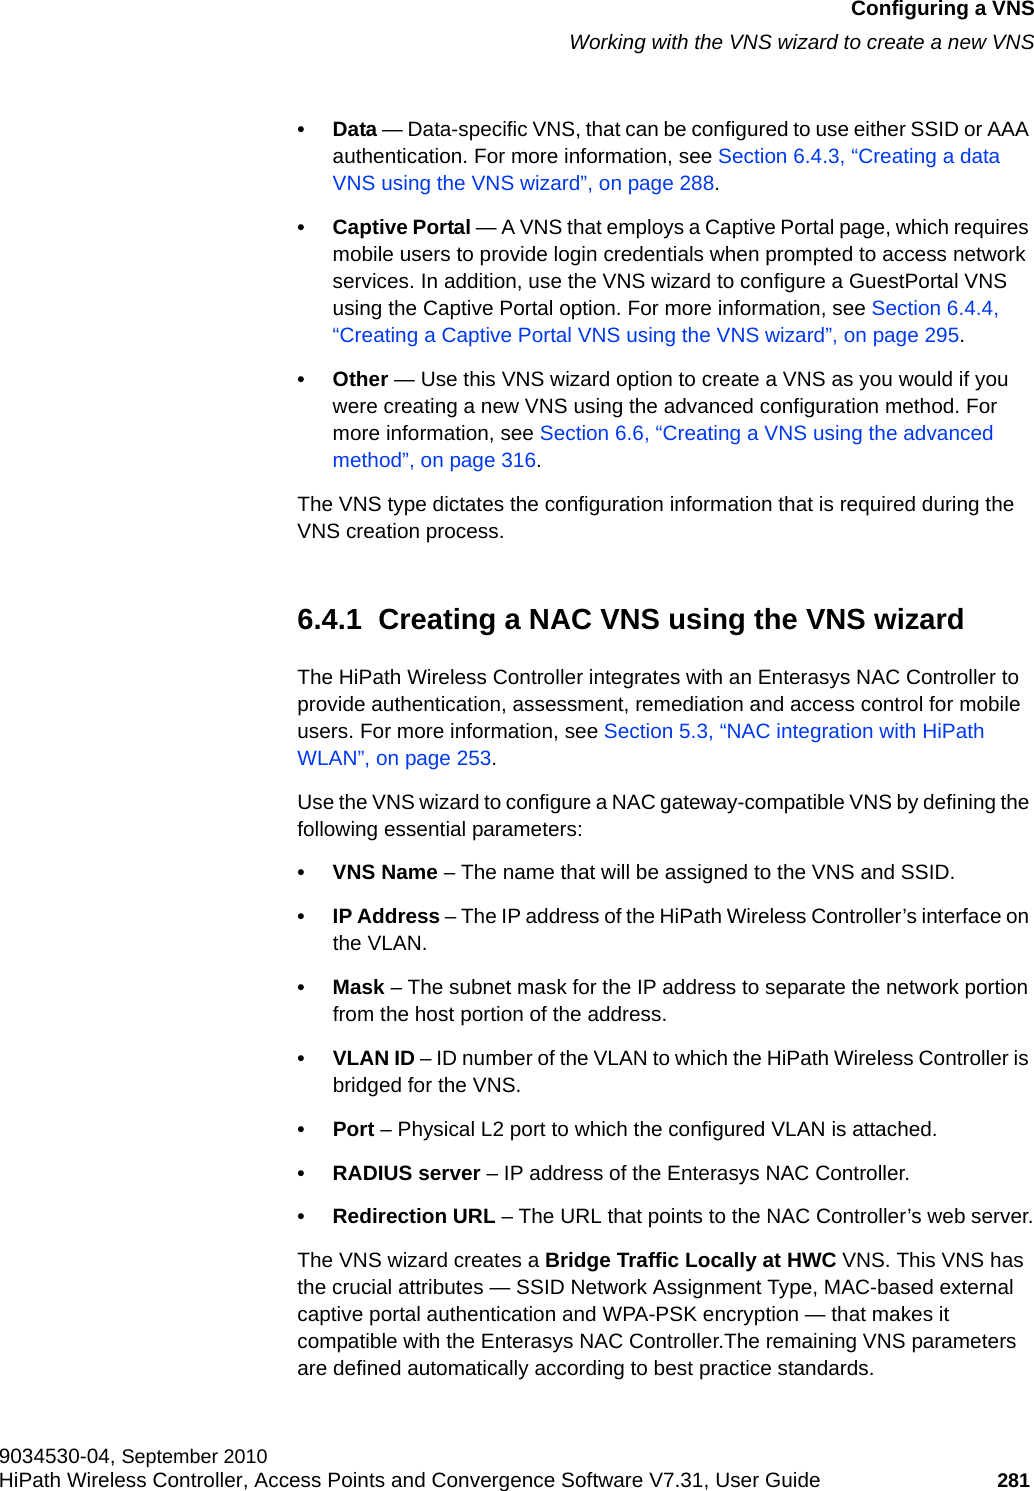 hwc_vnsconfiguration.fmConfiguring a VNSWorking with the VNS wizard to create a new VNS9034530-04, September 2010HiPath Wireless Controller, Access Points and Convergence Software V7.31, User Guide 281         •Data — Data-specific VNS, that can be configured to use either SSID or AAA authentication. For more information, see Section 6.4.3, “Creating a data VNS using the VNS wizard”, on page 288.• Captive Portal — A VNS that employs a Captive Portal page, which requires mobile users to provide login credentials when prompted to access network services. In addition, use the VNS wizard to configure a GuestPortal VNS using the Captive Portal option. For more information, see Section 6.4.4, “Creating a Captive Portal VNS using the VNS wizard”, on page 295.•Other — Use this VNS wizard option to create a VNS as you would if you were creating a new VNS using the advanced configuration method. For more information, see Section 6.6, “Creating a VNS using the advanced method”, on page 316.The VNS type dictates the configuration information that is required during the VNS creation process.6.4.1  Creating a NAC VNS using the VNS wizardThe HiPath Wireless Controller integrates with an Enterasys NAC Controller to provide authentication, assessment, remediation and access control for mobile users. For more information, see Section 5.3, “NAC integration with HiPath WLAN”, on page 253.Use the VNS wizard to configure a NAC gateway-compatible VNS by defining the following essential parameters:•VNS Name – The name that will be assigned to the VNS and SSID.•IP Address – The IP address of the HiPath Wireless Controller’s interface on the VLAN.•Mask – The subnet mask for the IP address to separate the network portion from the host portion of the address. •VLAN ID – ID number of the VLAN to which the HiPath Wireless Controller is bridged for the VNS.•Port – Physical L2 port to which the configured VLAN is attached.•RADIUS server – IP address of the Enterasys NAC Controller.• Redirection URL – The URL that points to the NAC Controller’s web server.The VNS wizard creates a Bridge Traffic Locally at HWC VNS. This VNS has the crucial attributes — SSID Network Assignment Type, MAC-based external captive portal authentication and WPA-PSK encryption — that makes it compatible with the Enterasys NAC Controller.The remaining VNS parameters are defined automatically according to best practice standards. 